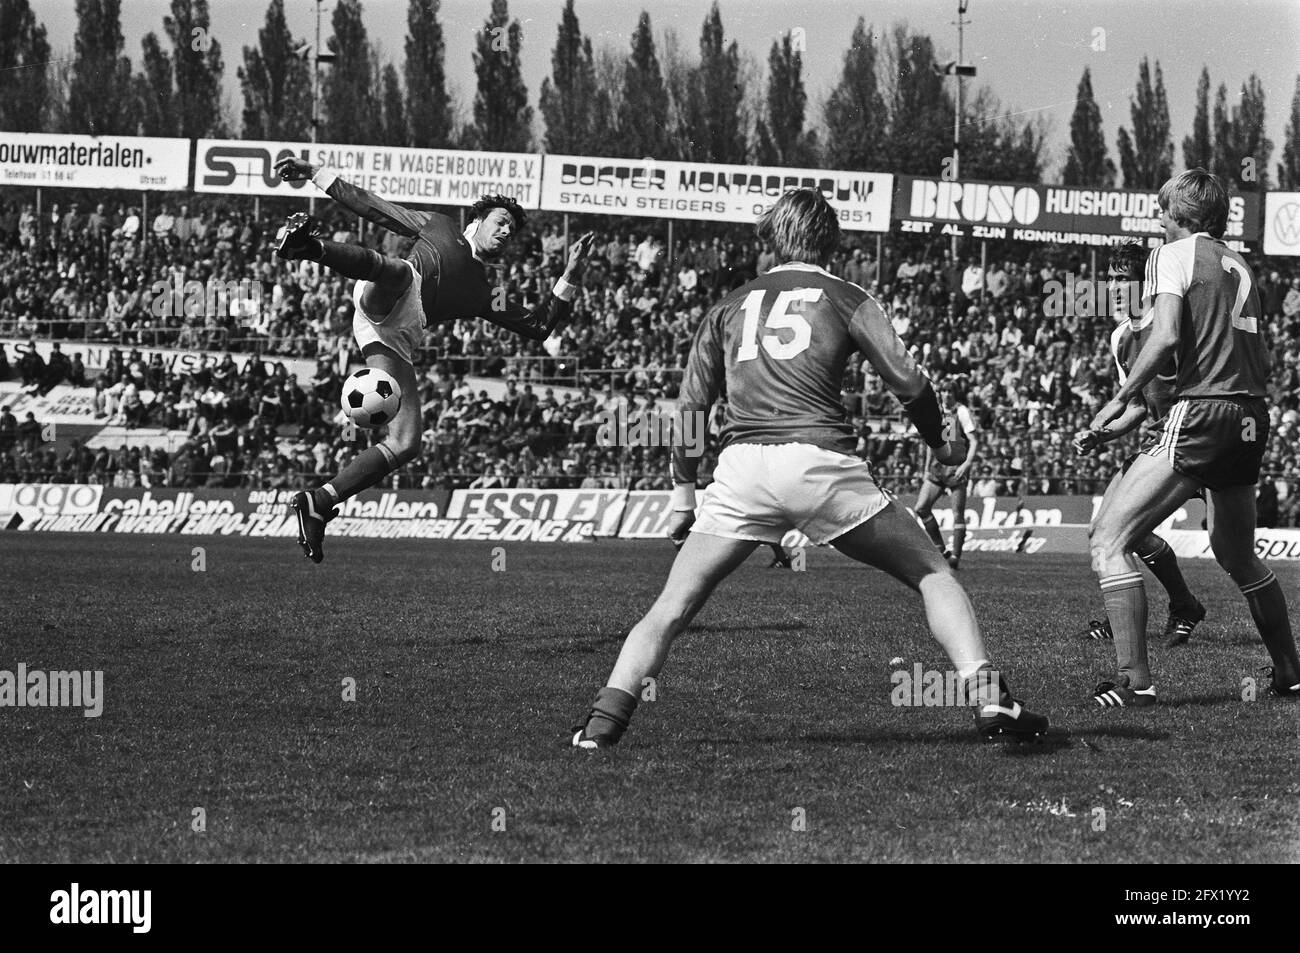 Last match in Galgenwaard stadium in Utrecht, FC Utrecht against PSV, Utrecht player Van Veen and PSV player Jansen, 20 April 1981, sports, soccer, The Netherlands, 20th century press agency photo, news to remember, documentary, historic photography 1945-1990, visual stories, human history of the Twentieth Century, capturing moments in time Stock Photo